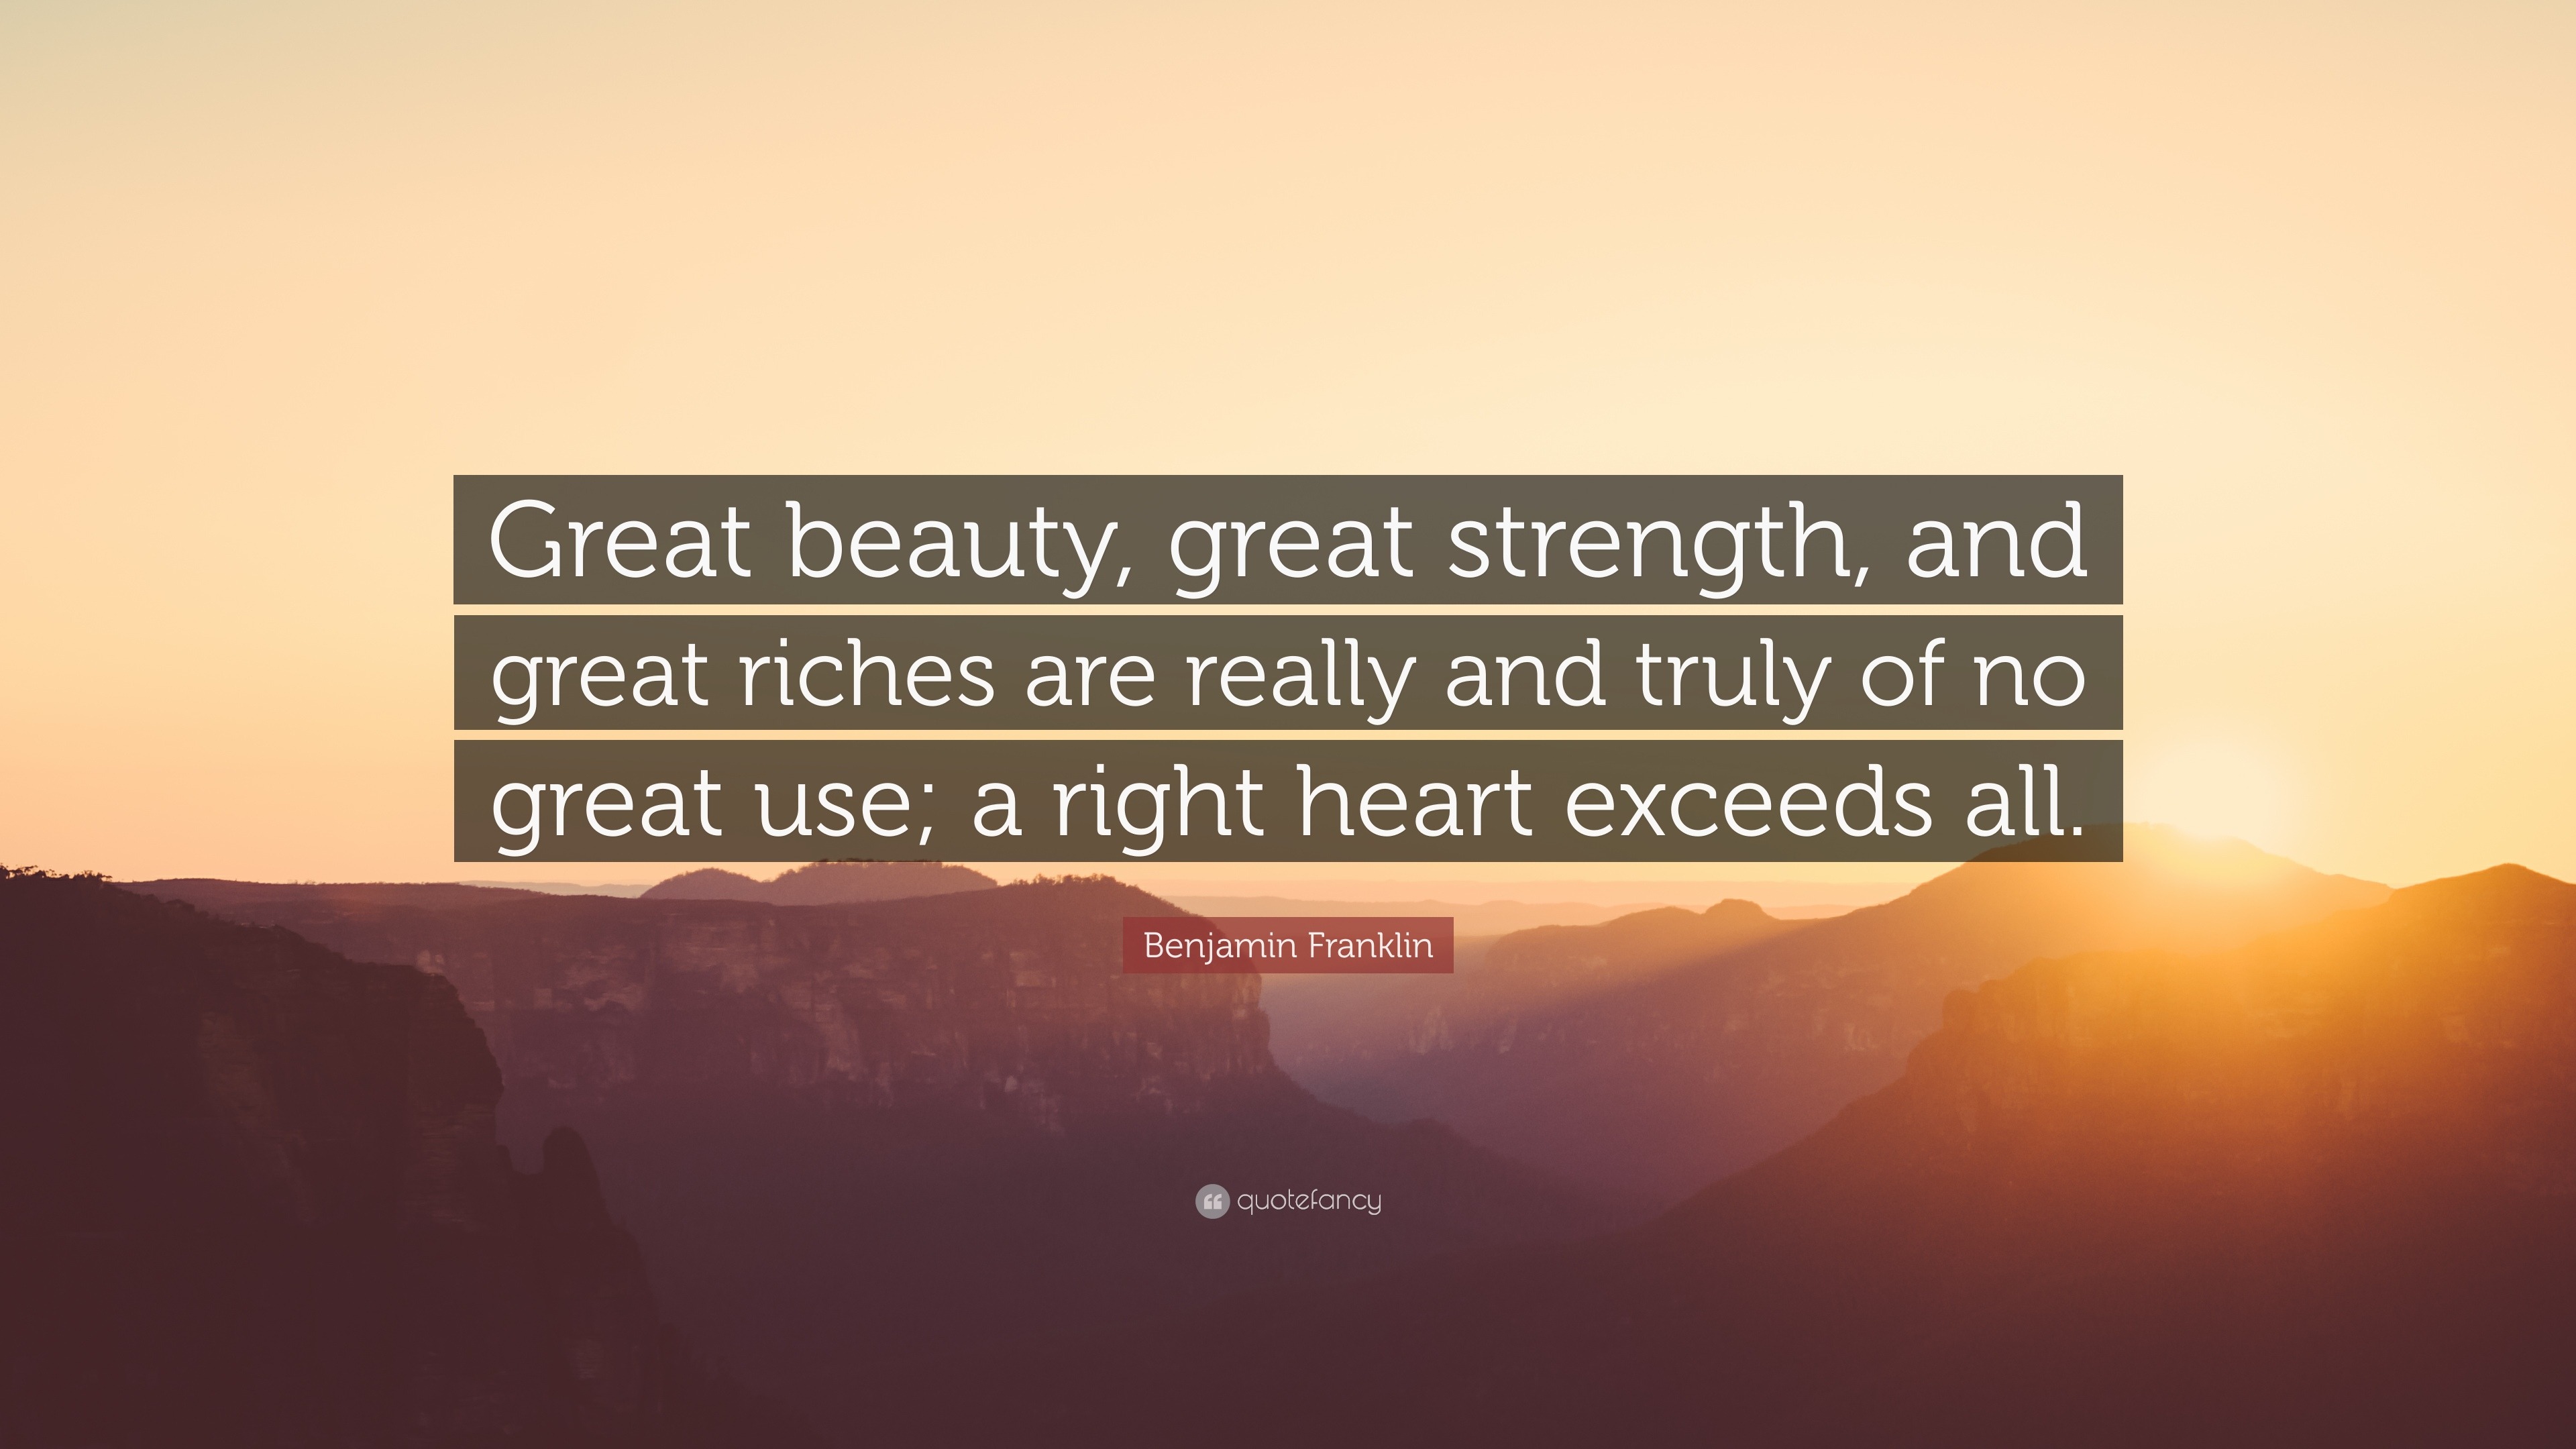 Image result for "Great beauty , great strength, and great riches are really and  and truly of no great use. A right heart exceeds all.